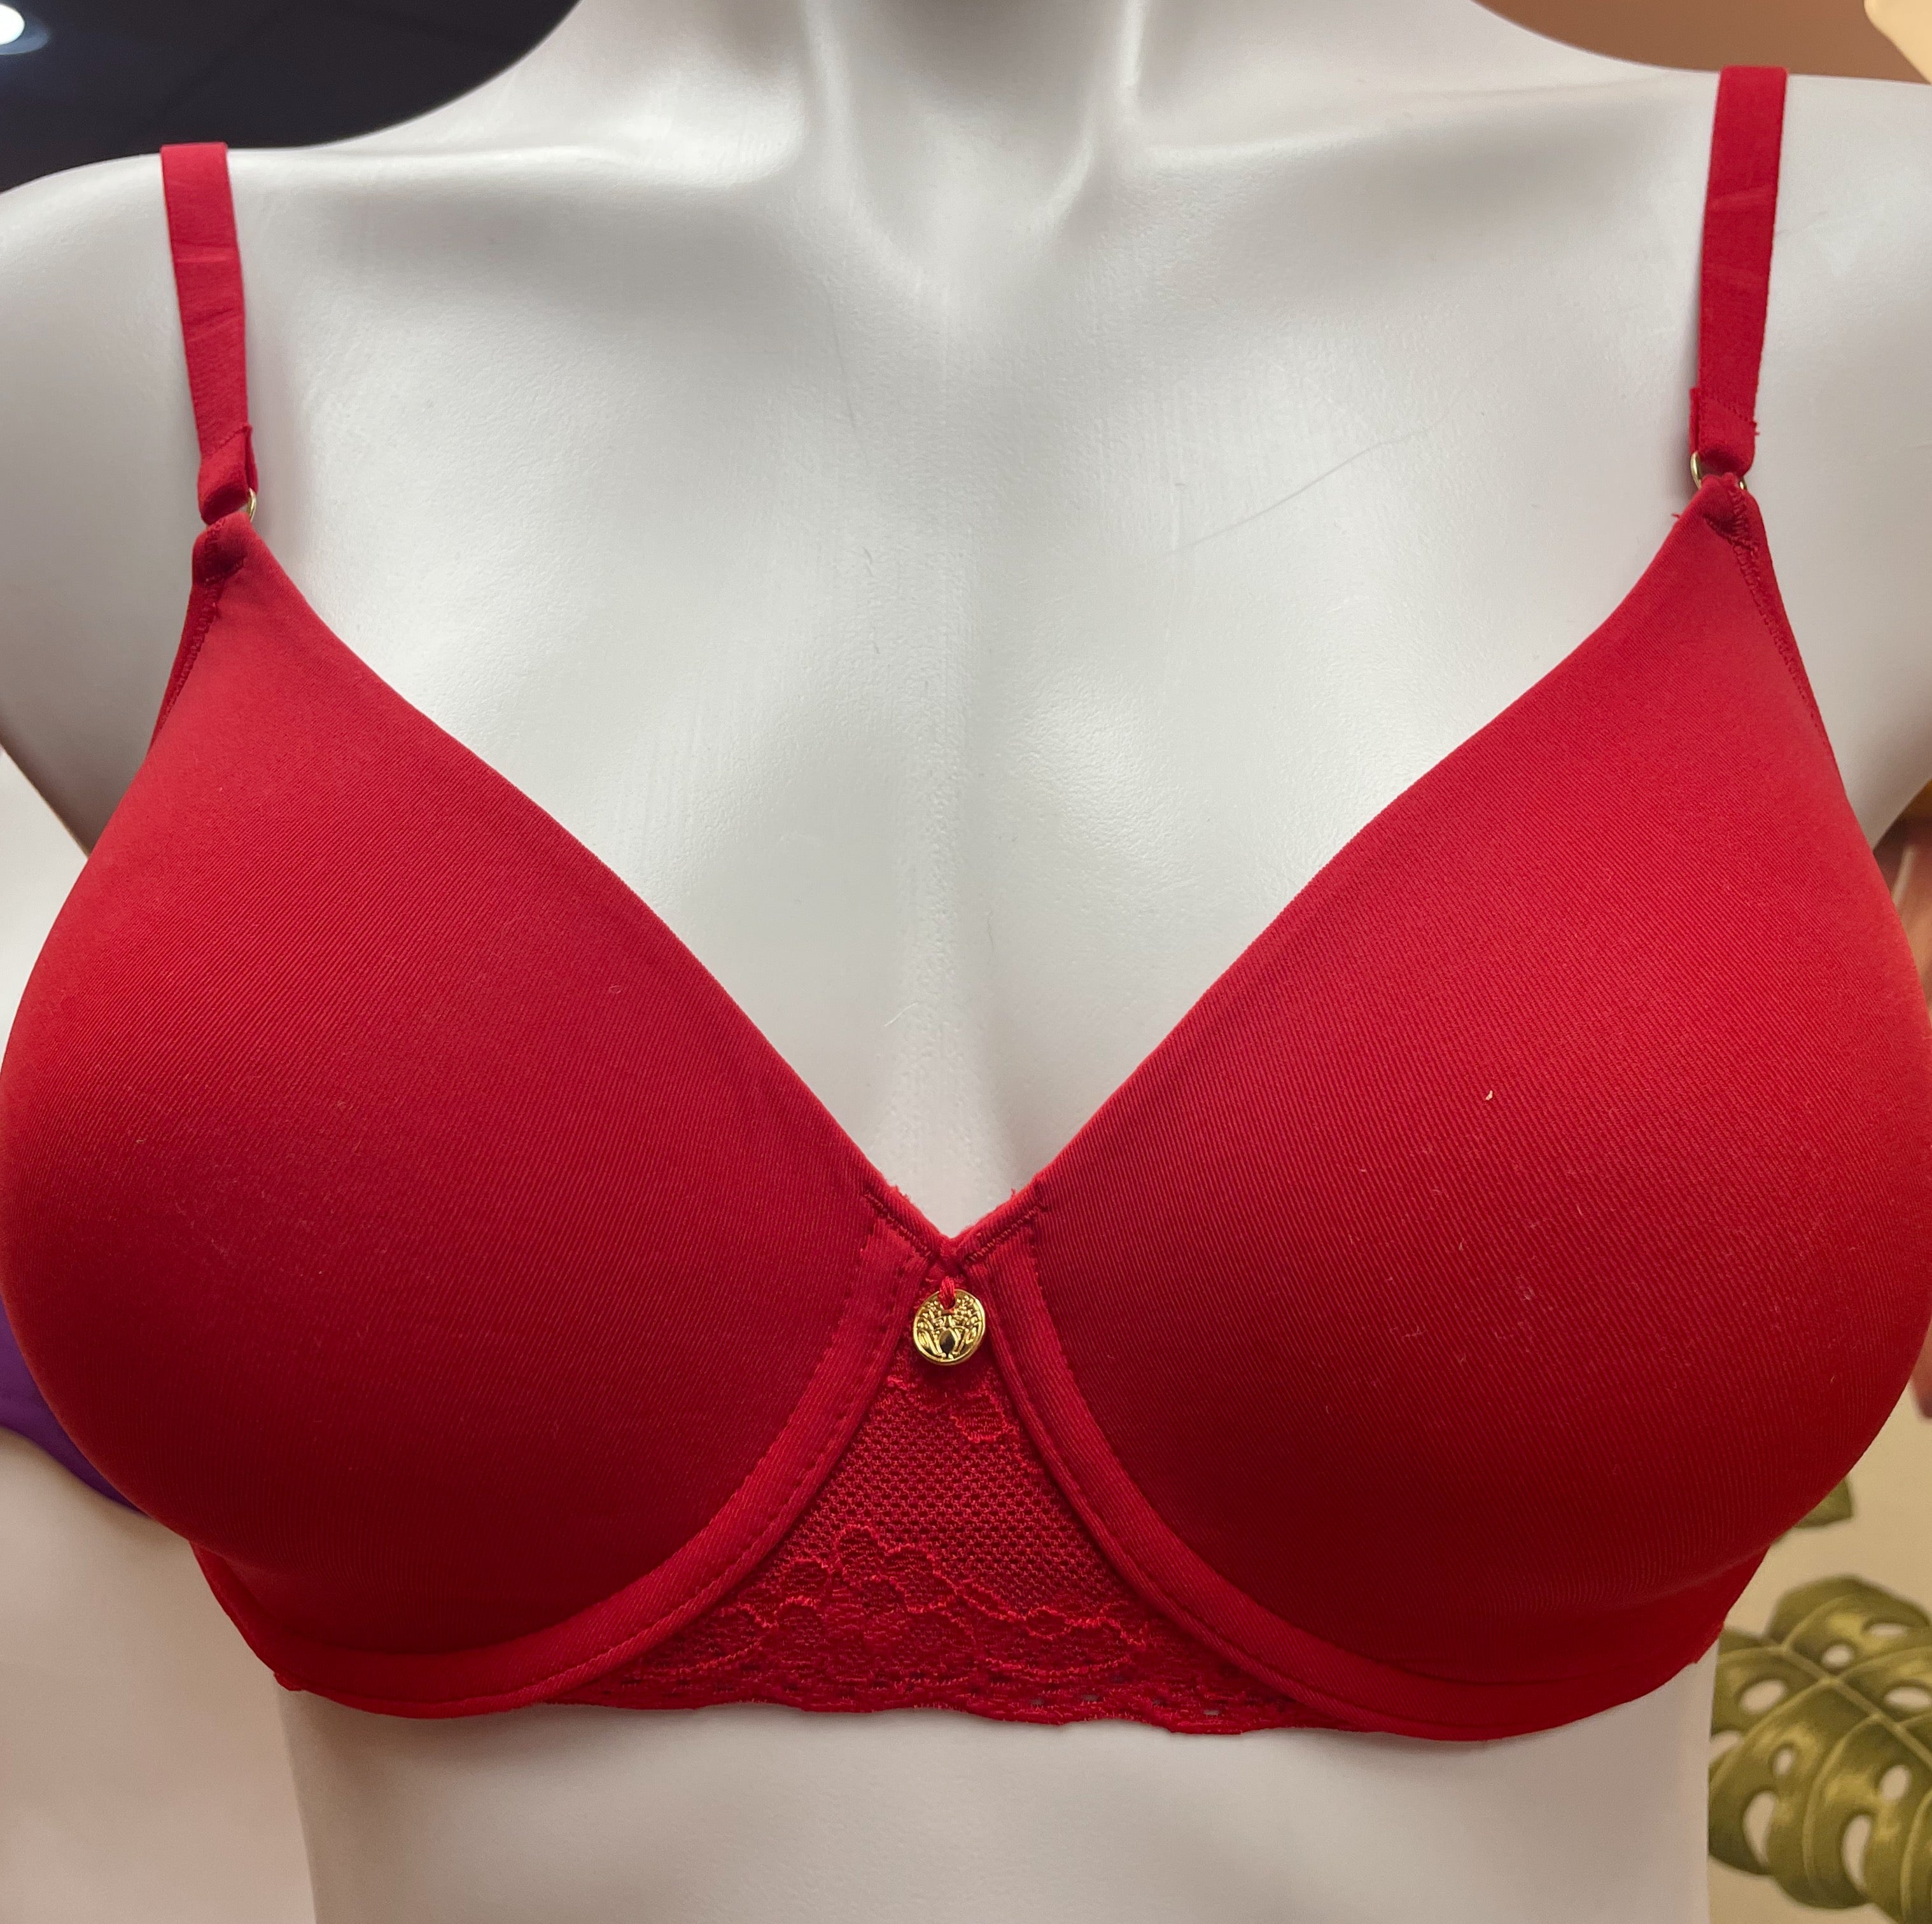 Natori Bliss Perfection Contour Underwire T-Shirt Bra - Basic Colors –  Filly Rose